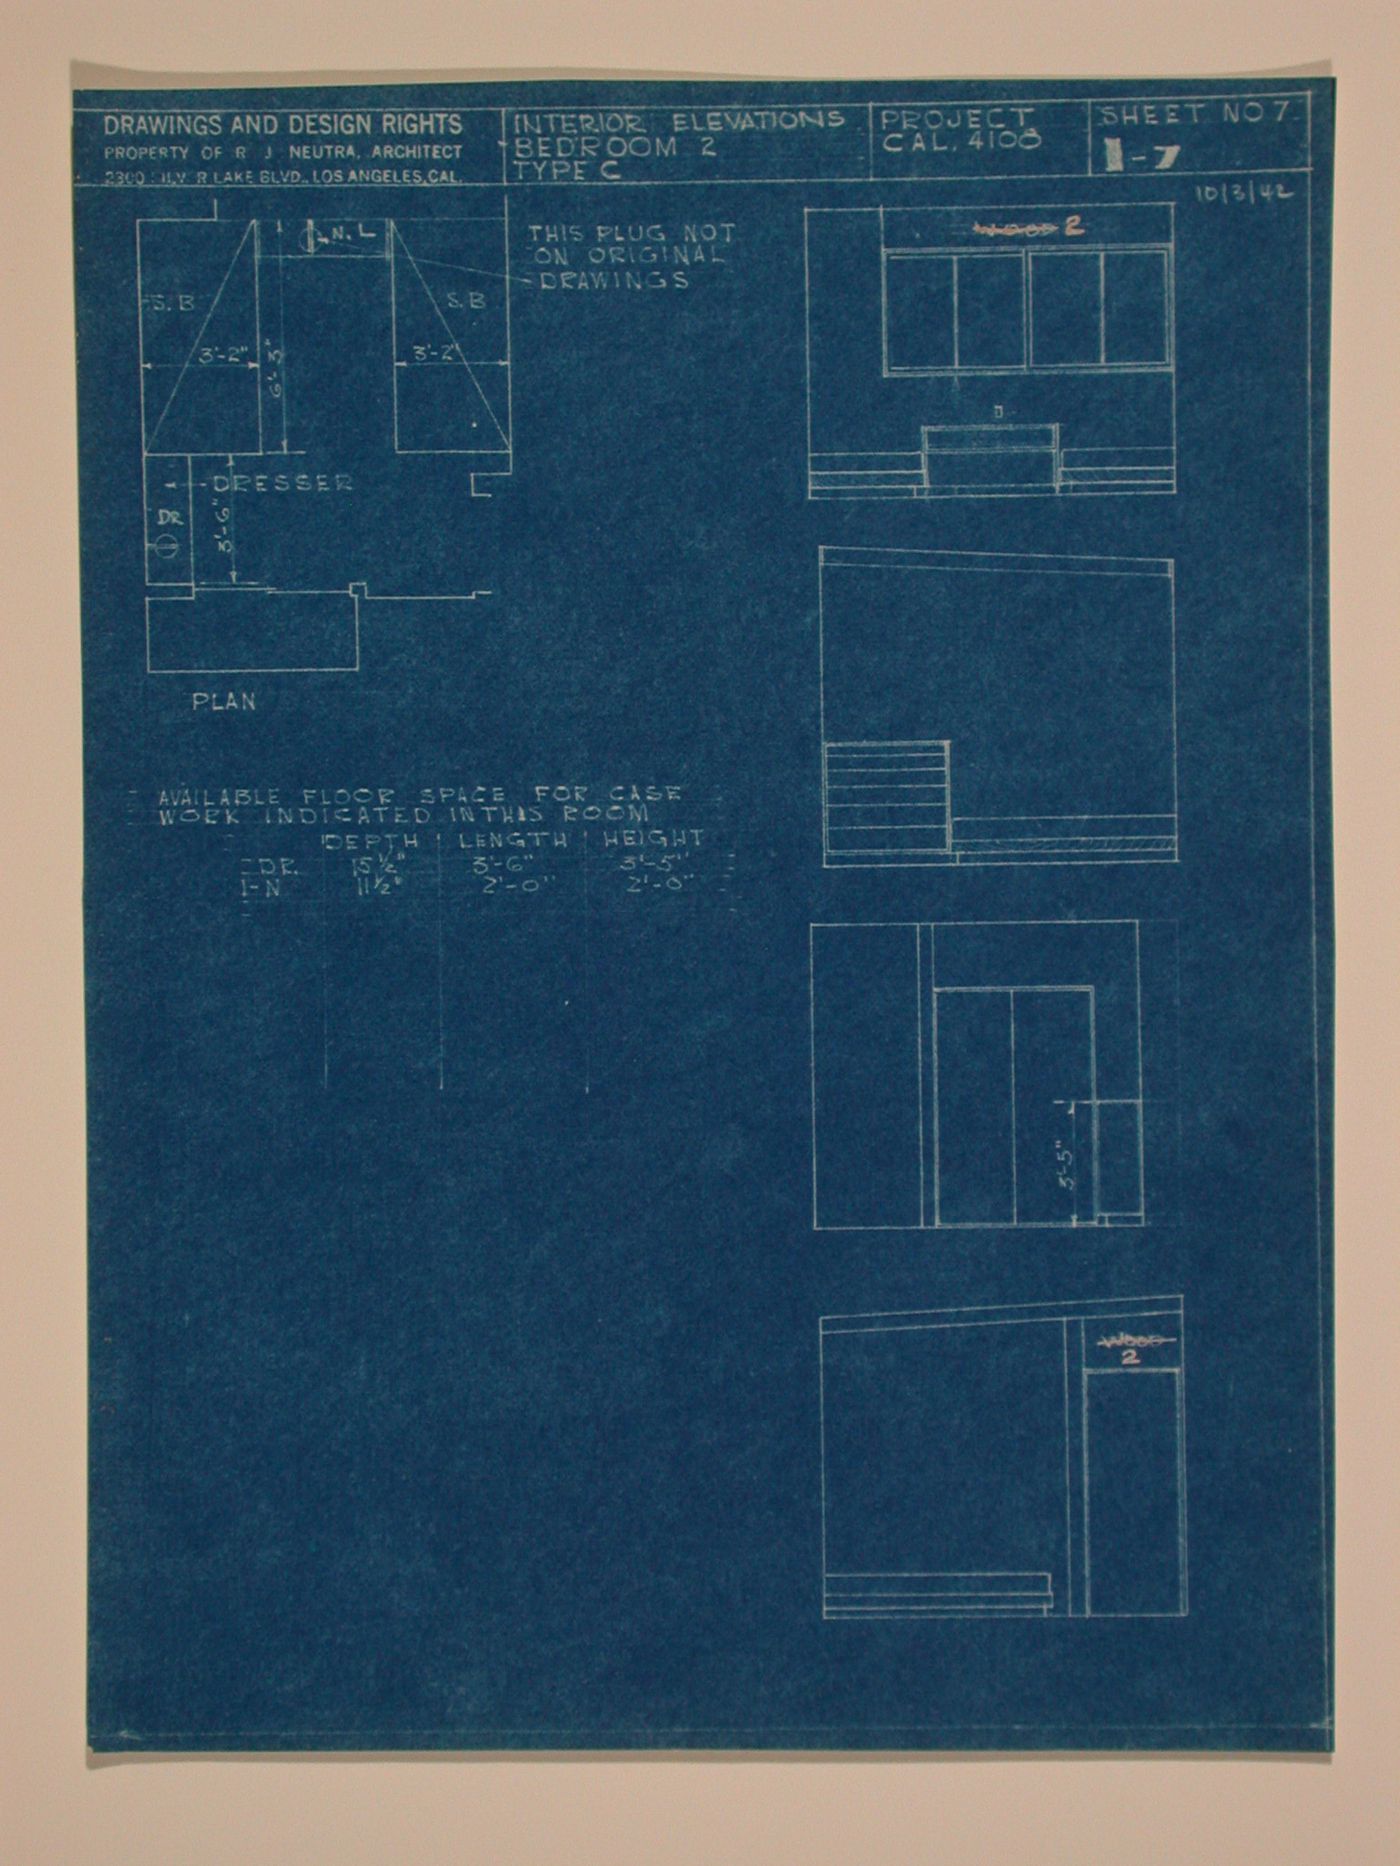 Interior elevations and plan for bedroom no. 2 type "C"